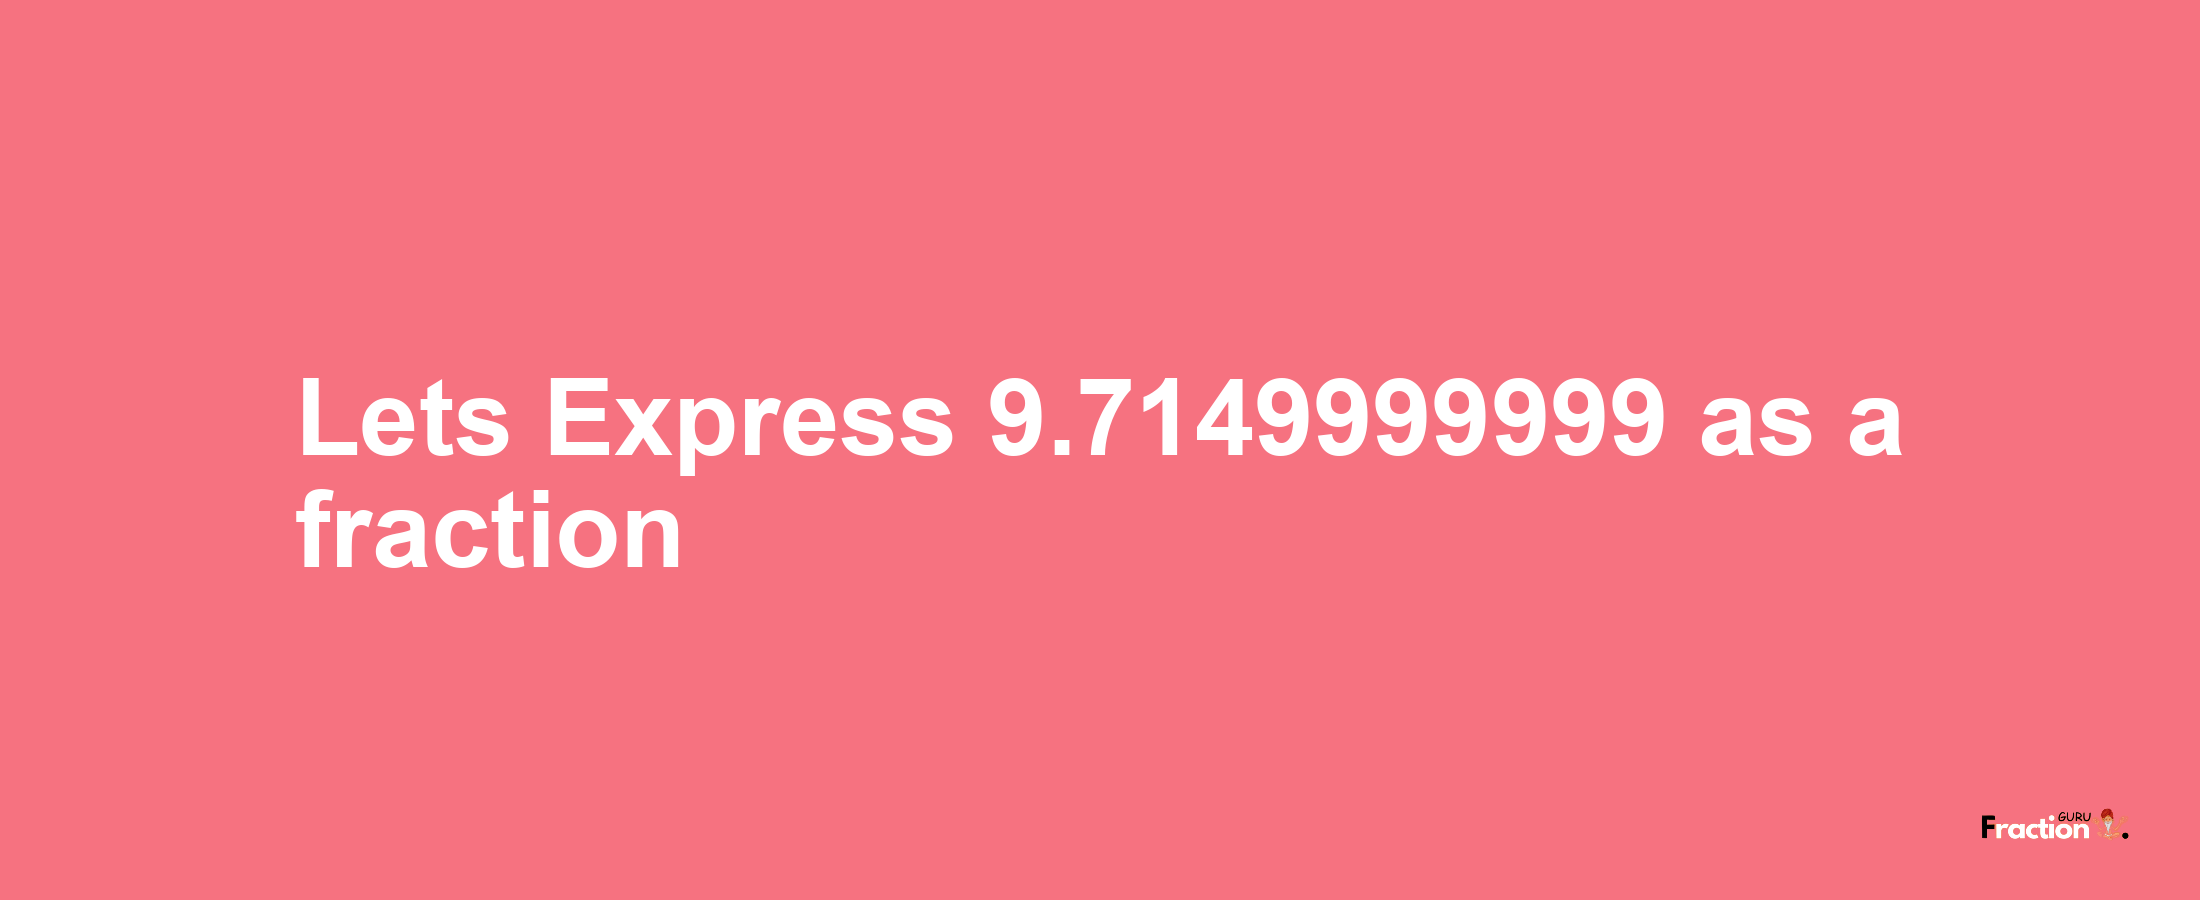 Lets Express 9.7149999999 as afraction